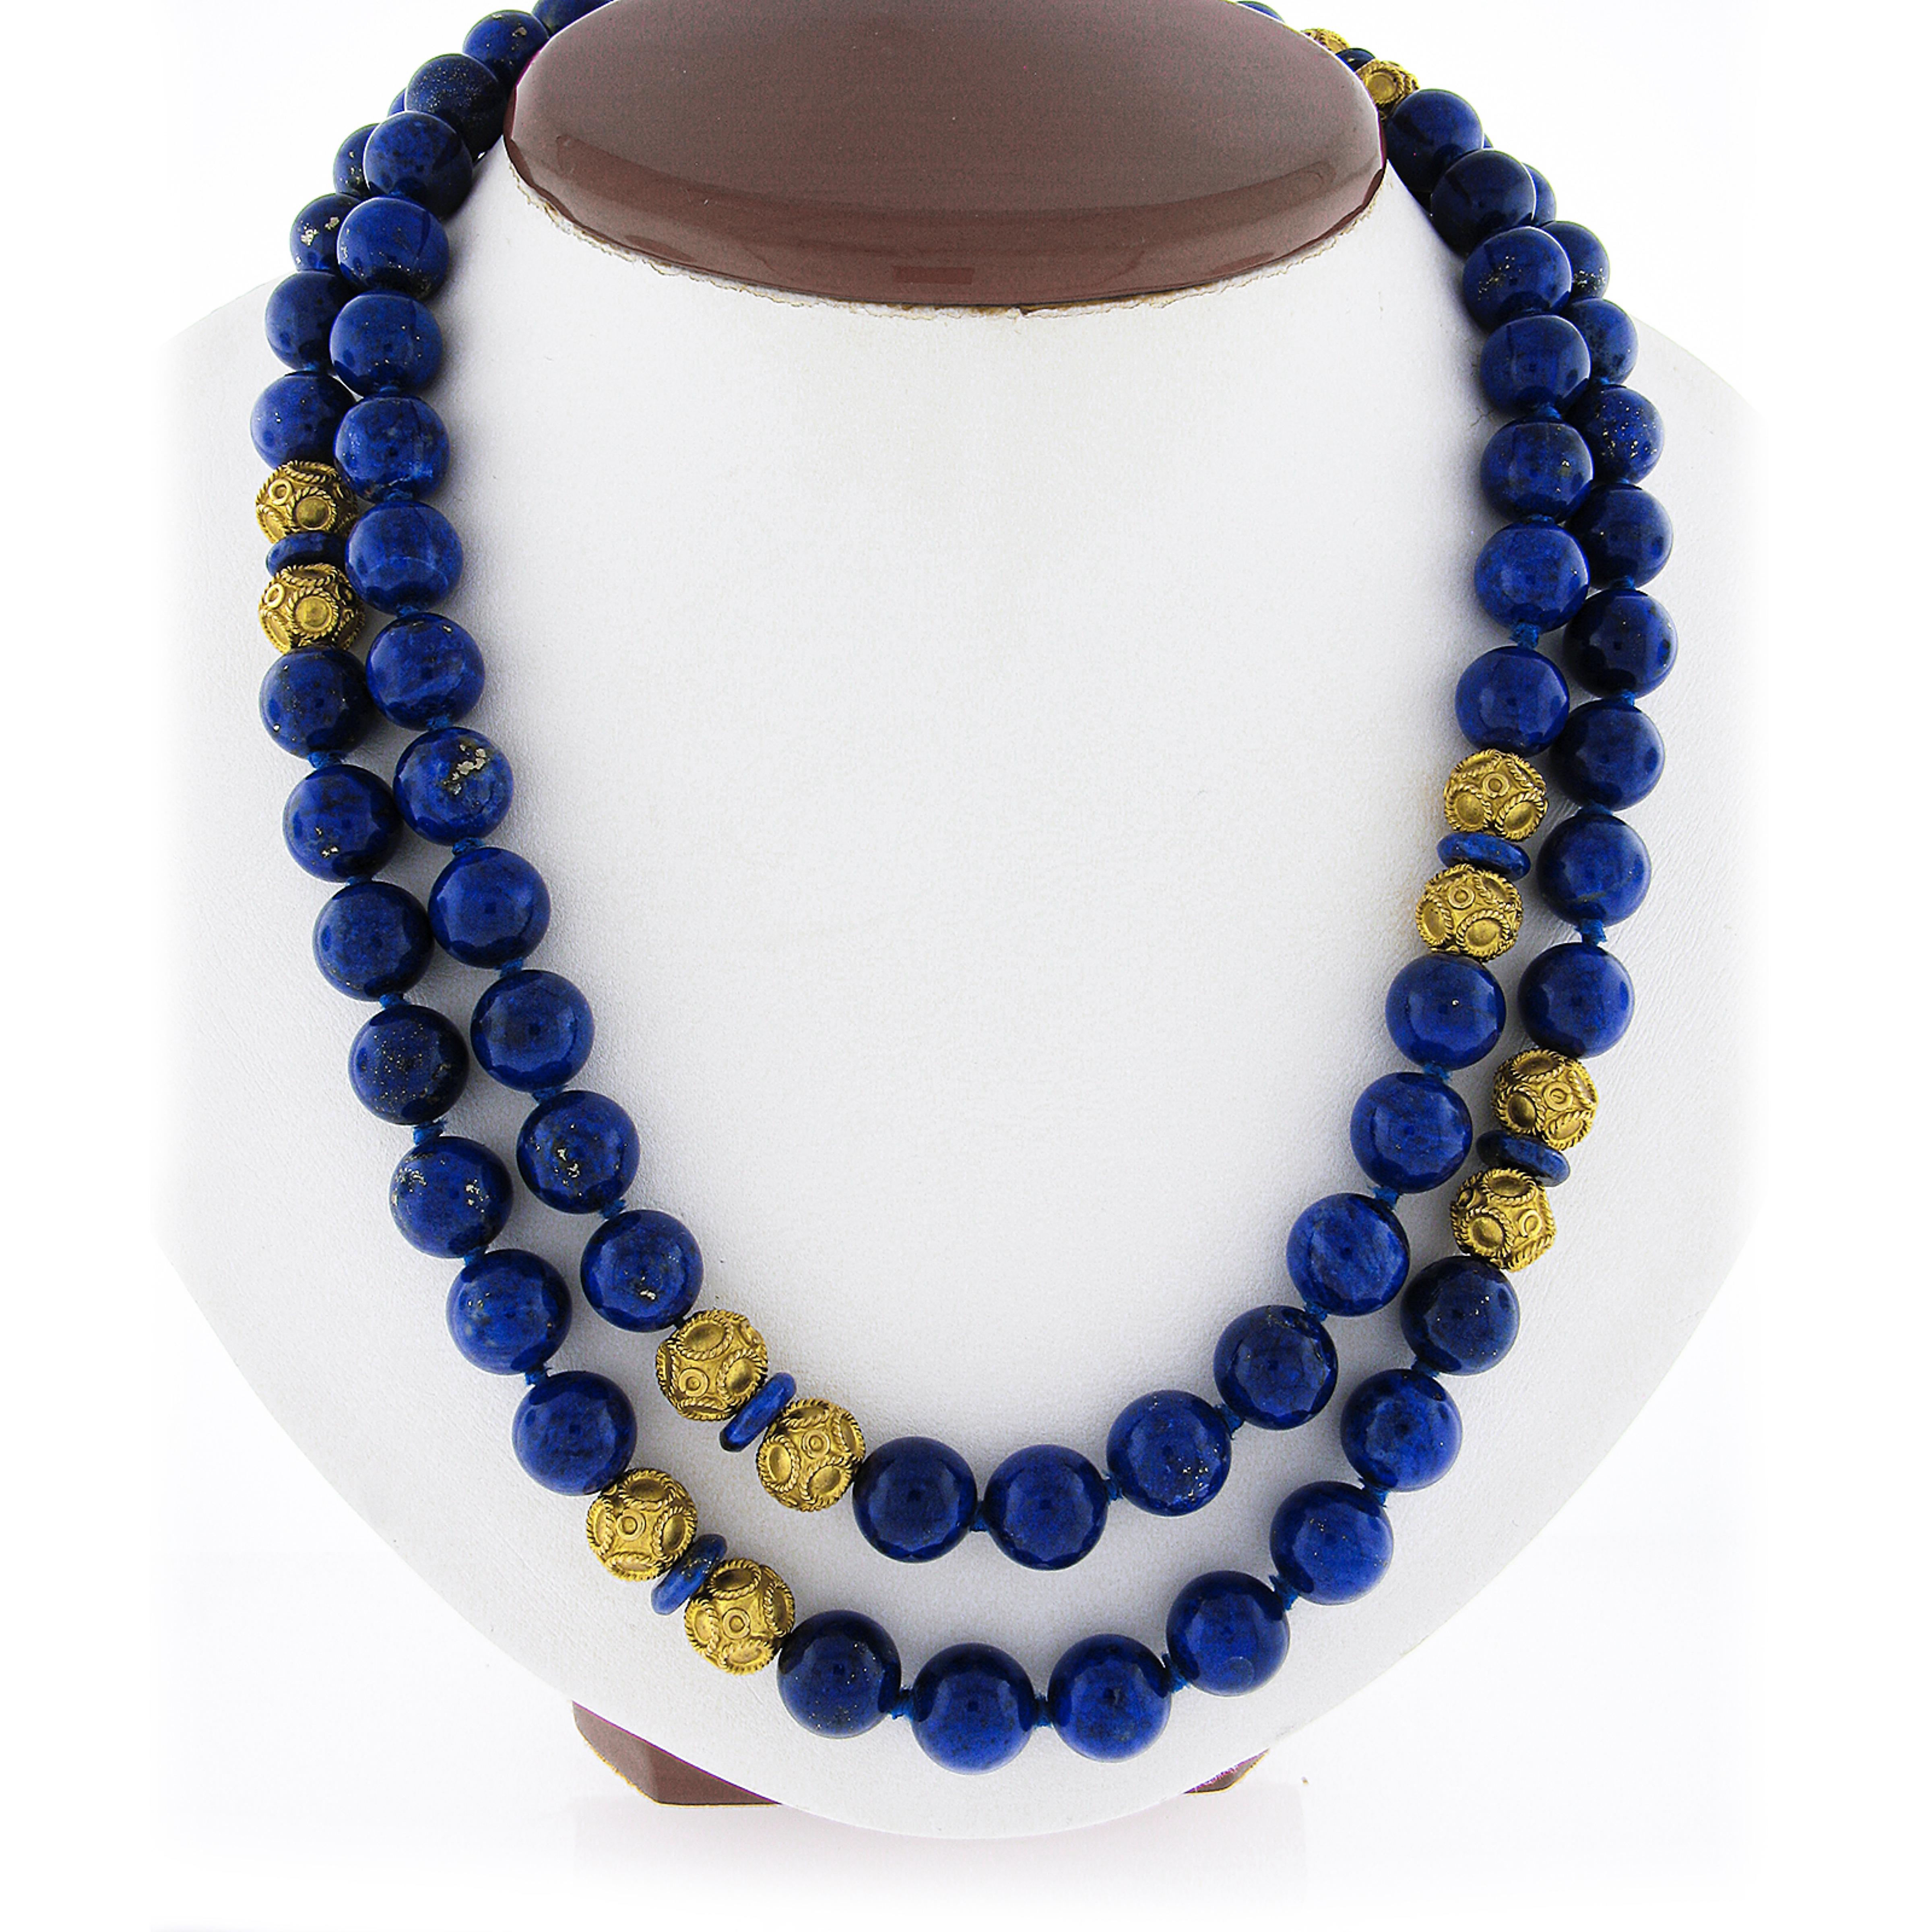 Here we have a gorgeous bead strand necklace that features 80 genuine lapis lazuli beads that are GIA certified & elegantly accented with 18k yellow gold twisted wire work bead stations throughout. The beads display beautiful vivid blue colors. The